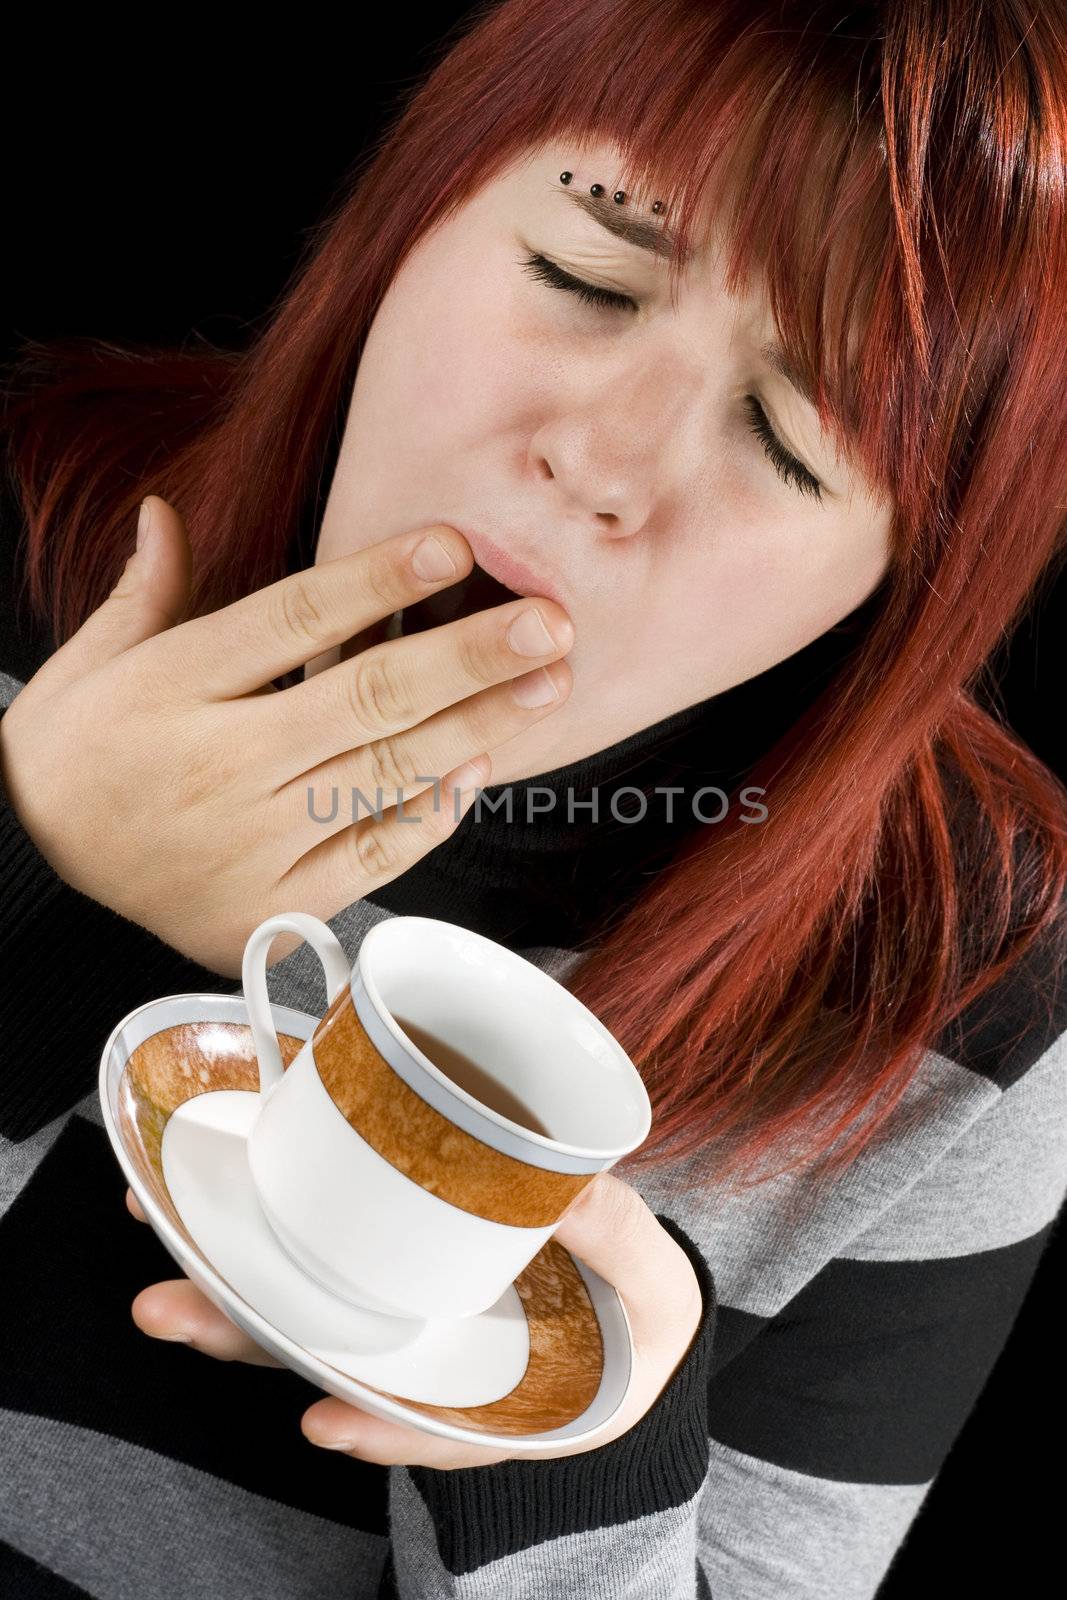 Girl preparing to drink her cup of coffee. Tired.

Studio shot.